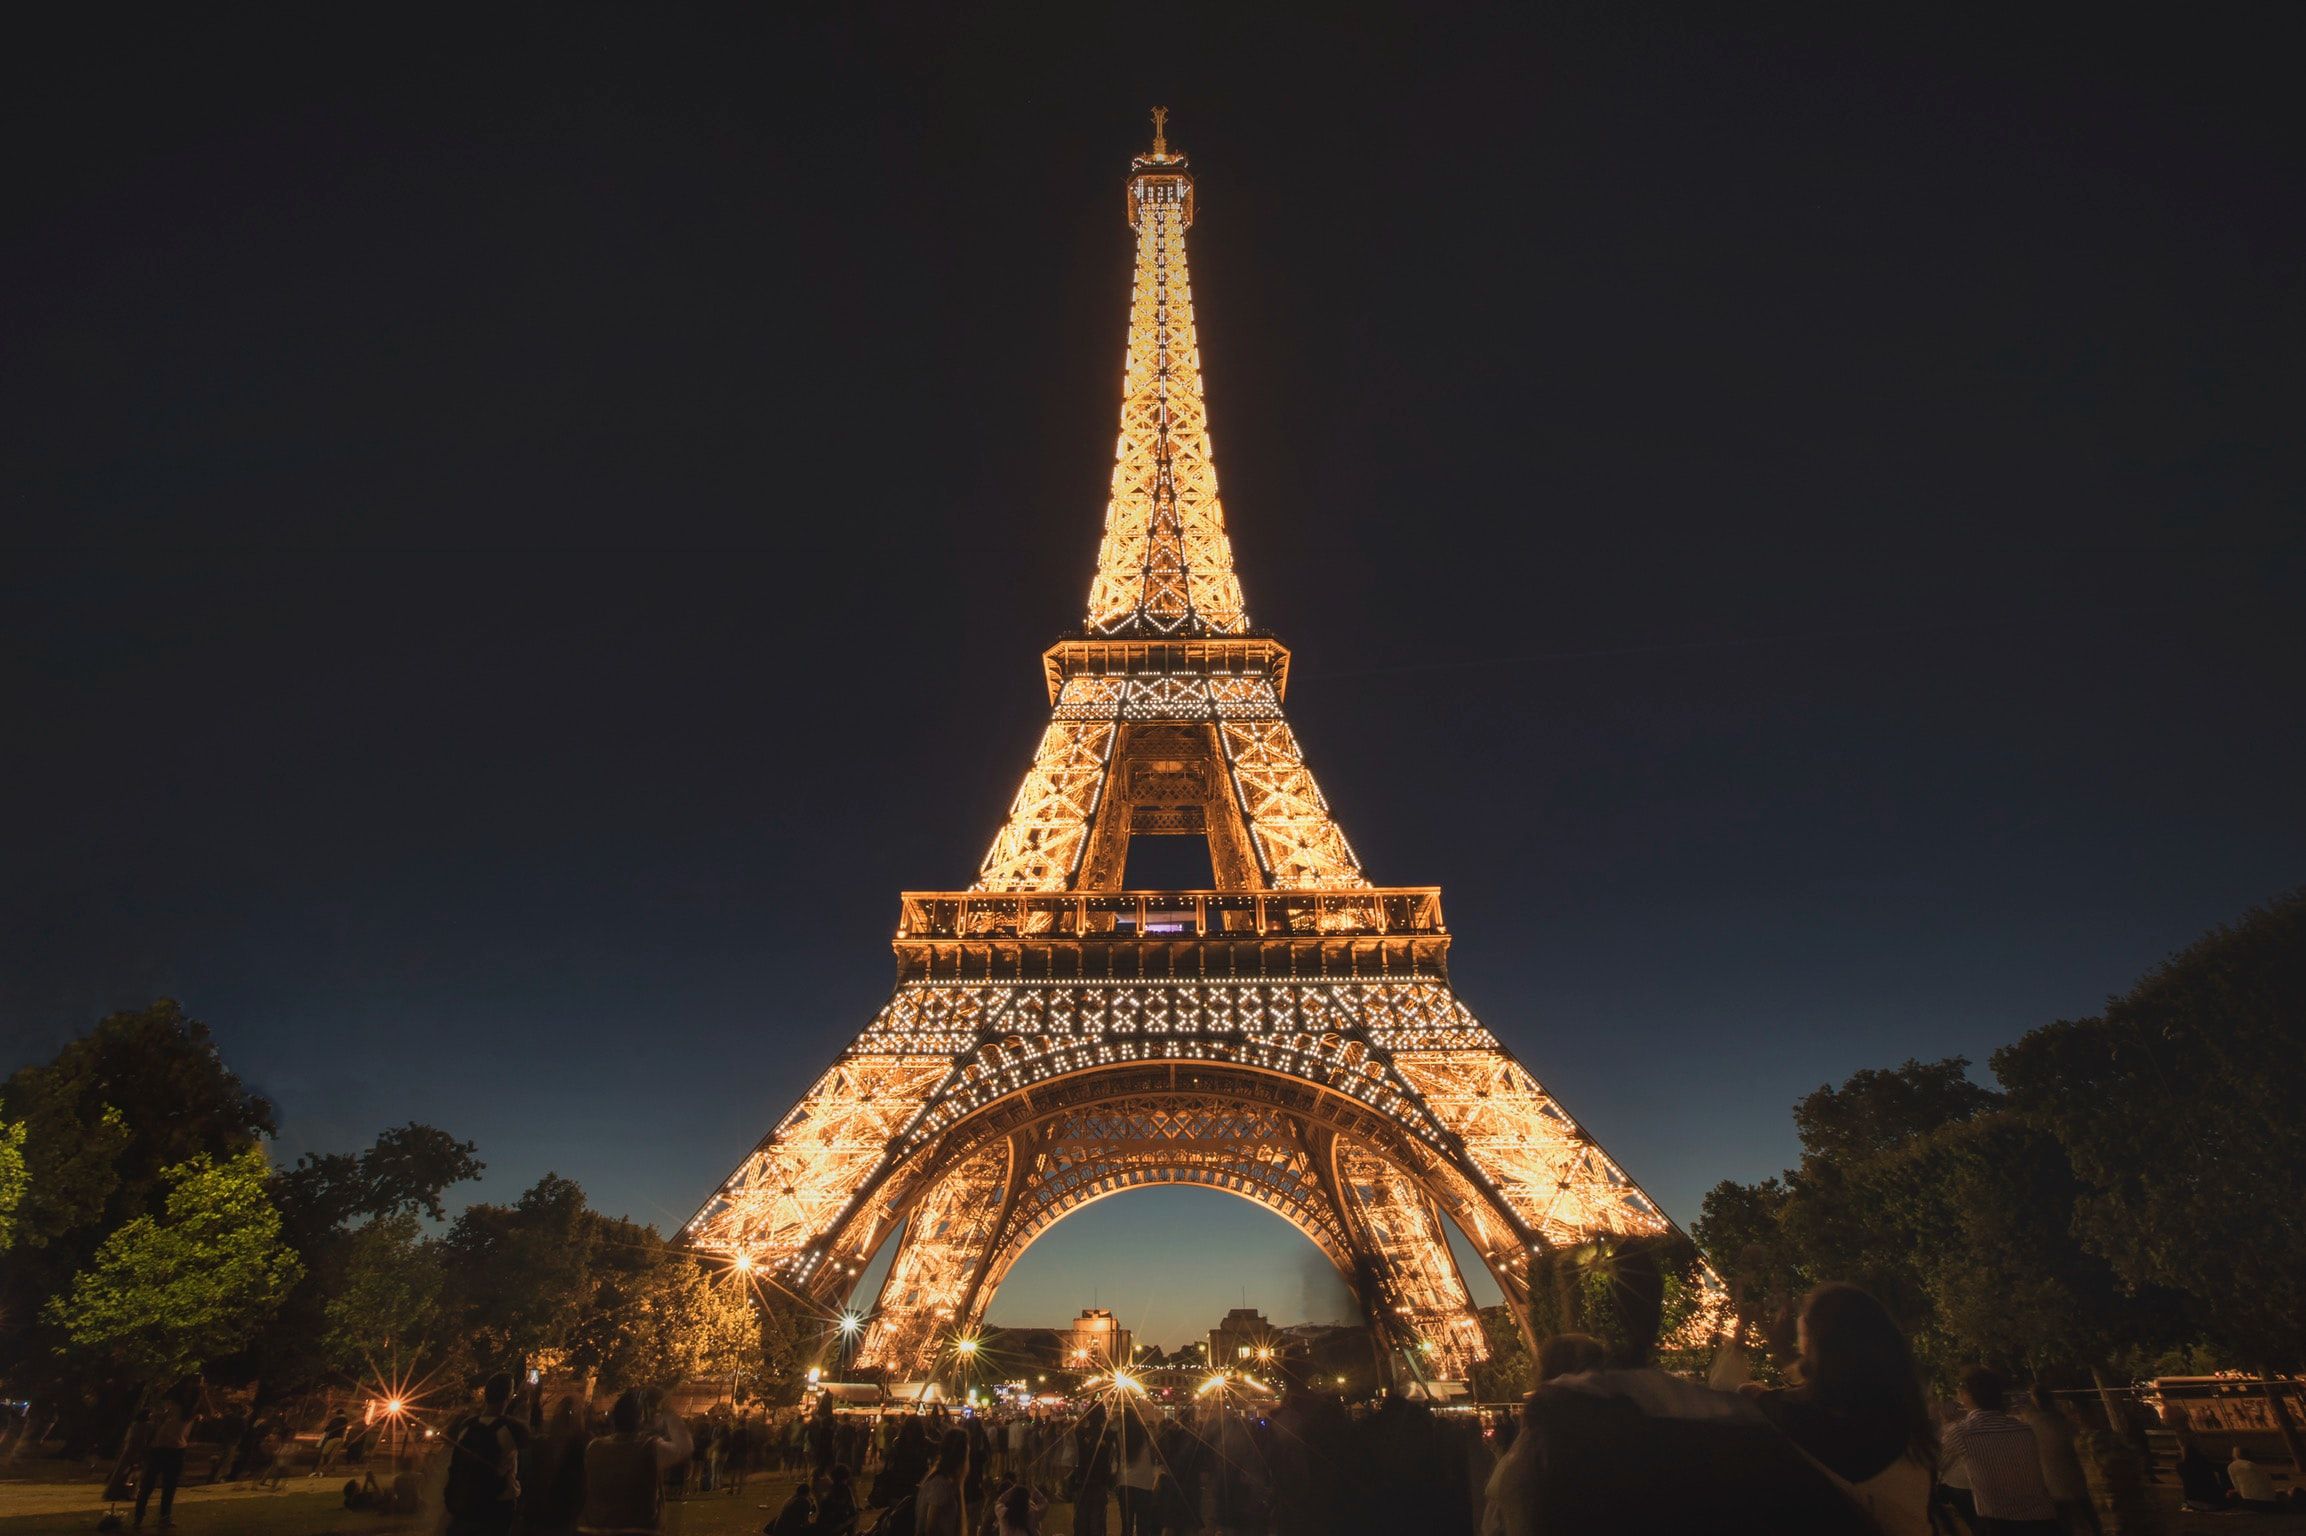 The Eiffel Tower Lit Up at Night